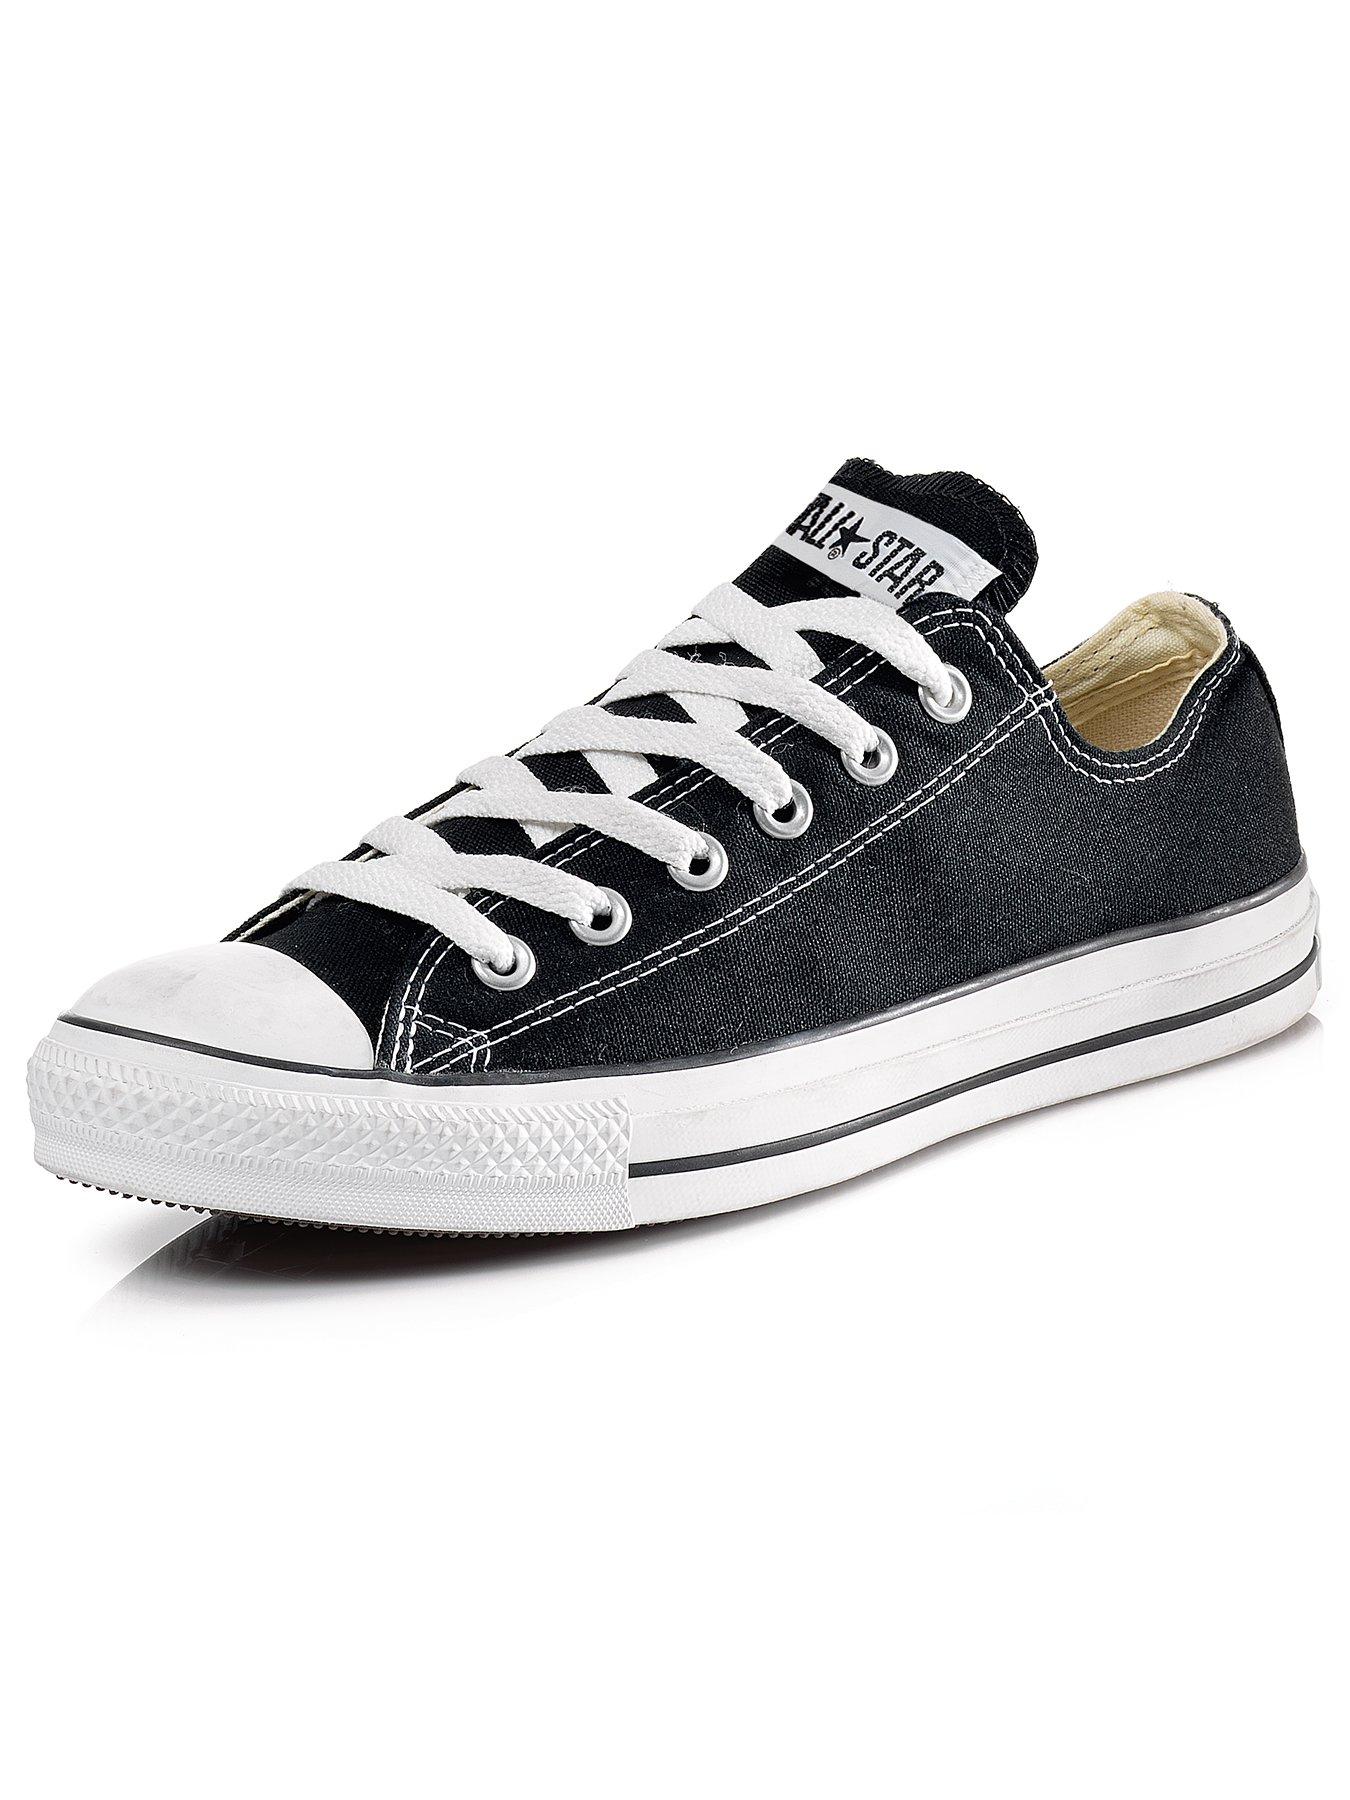 converse grey chuck taylor all star knot ox trainers